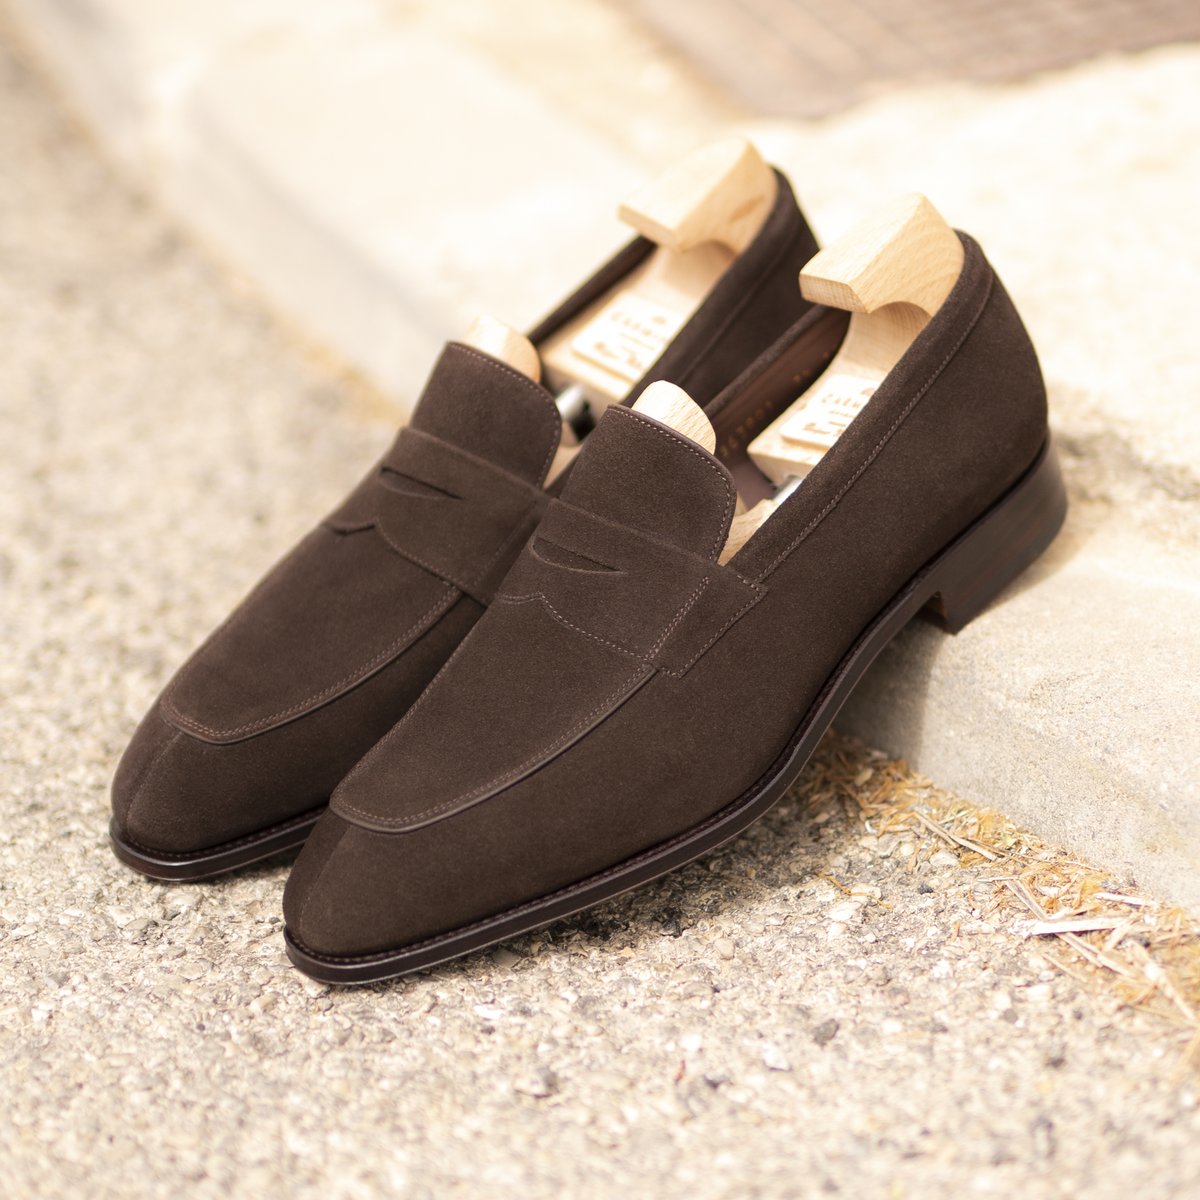 Penny loafers 10082 in brown suede. Simpson Last. 
​#カルミナ #carmina #carminashoemaker #pennyloafers #menloafers #suedeshoes #mens #mensstyle #mensfashion #menstyle    carminashoemaker.com/penny-loafers-…